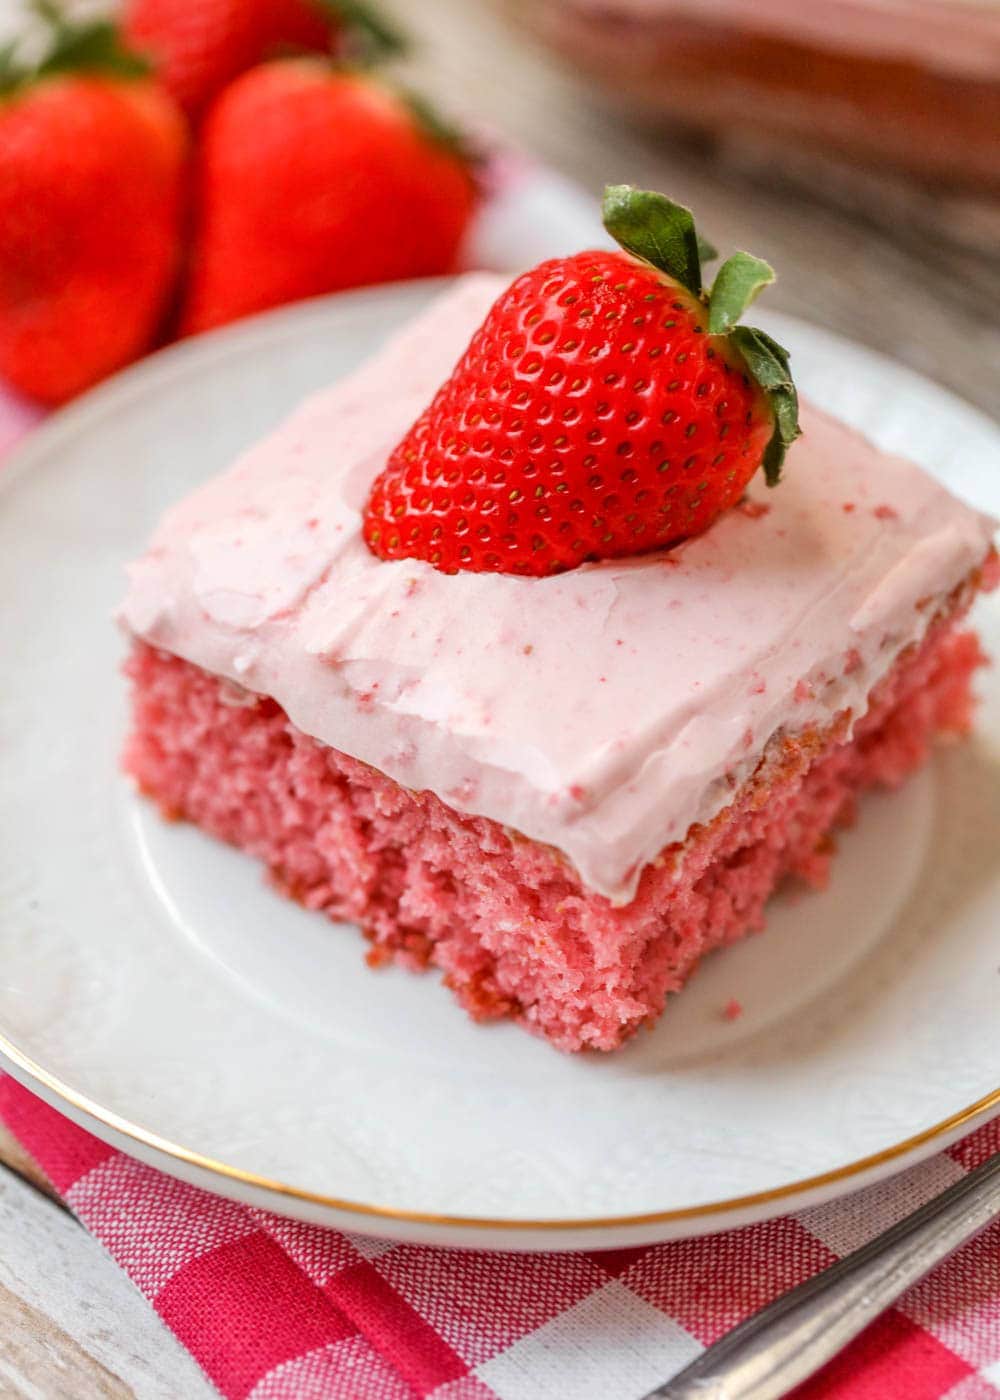 Strawberry sheet cake recipe on plate topped with a fresh strawberry.